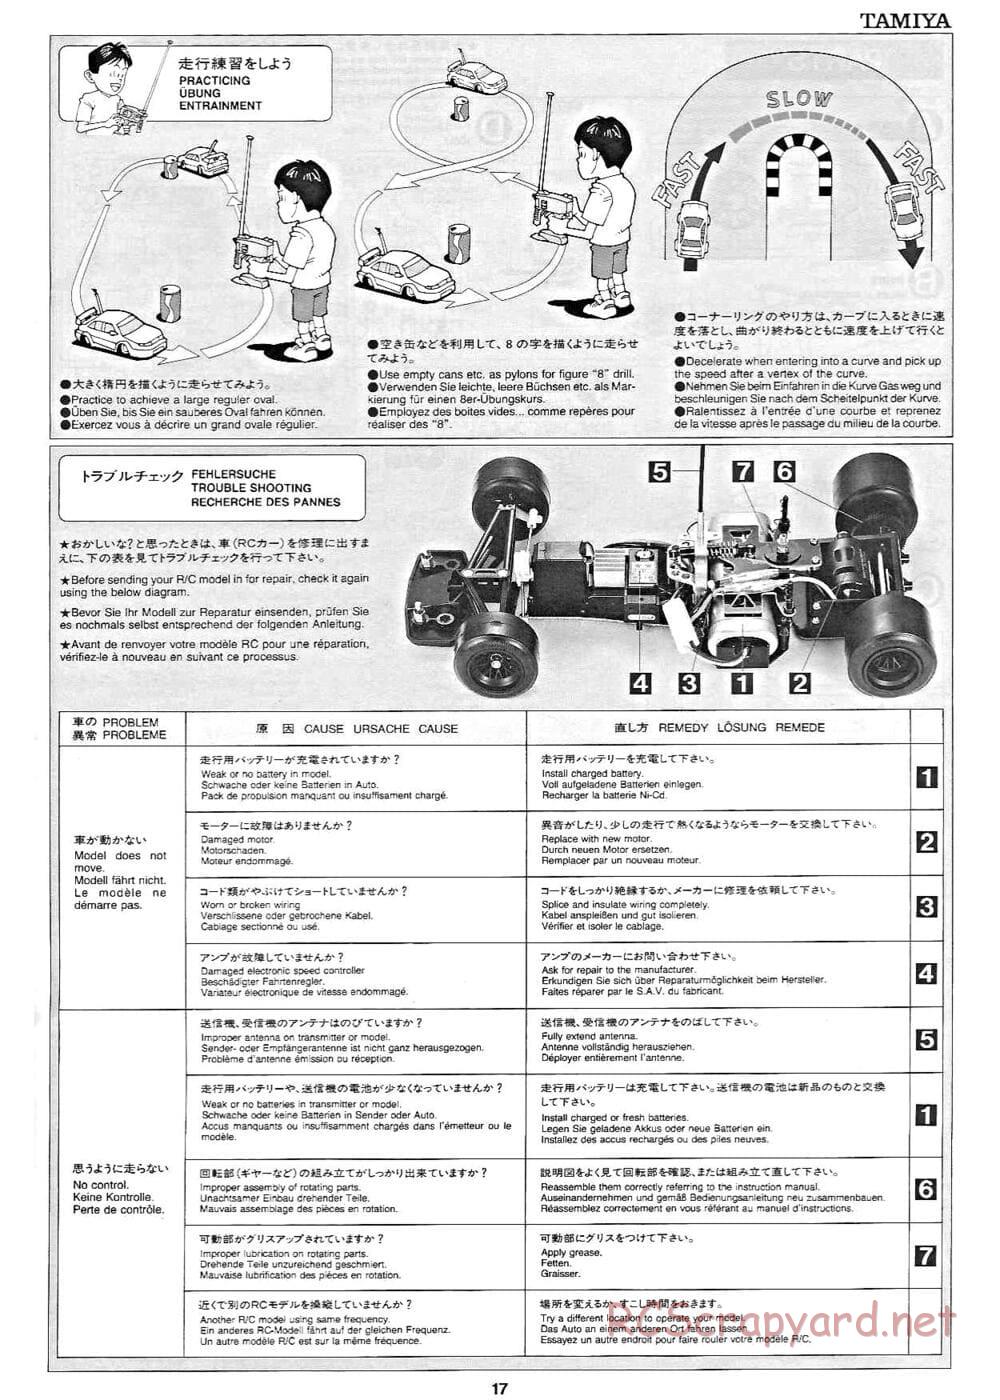 Tamiya - Toyota GT-One TS020 - F103RS Chassis - Manual - Page 17